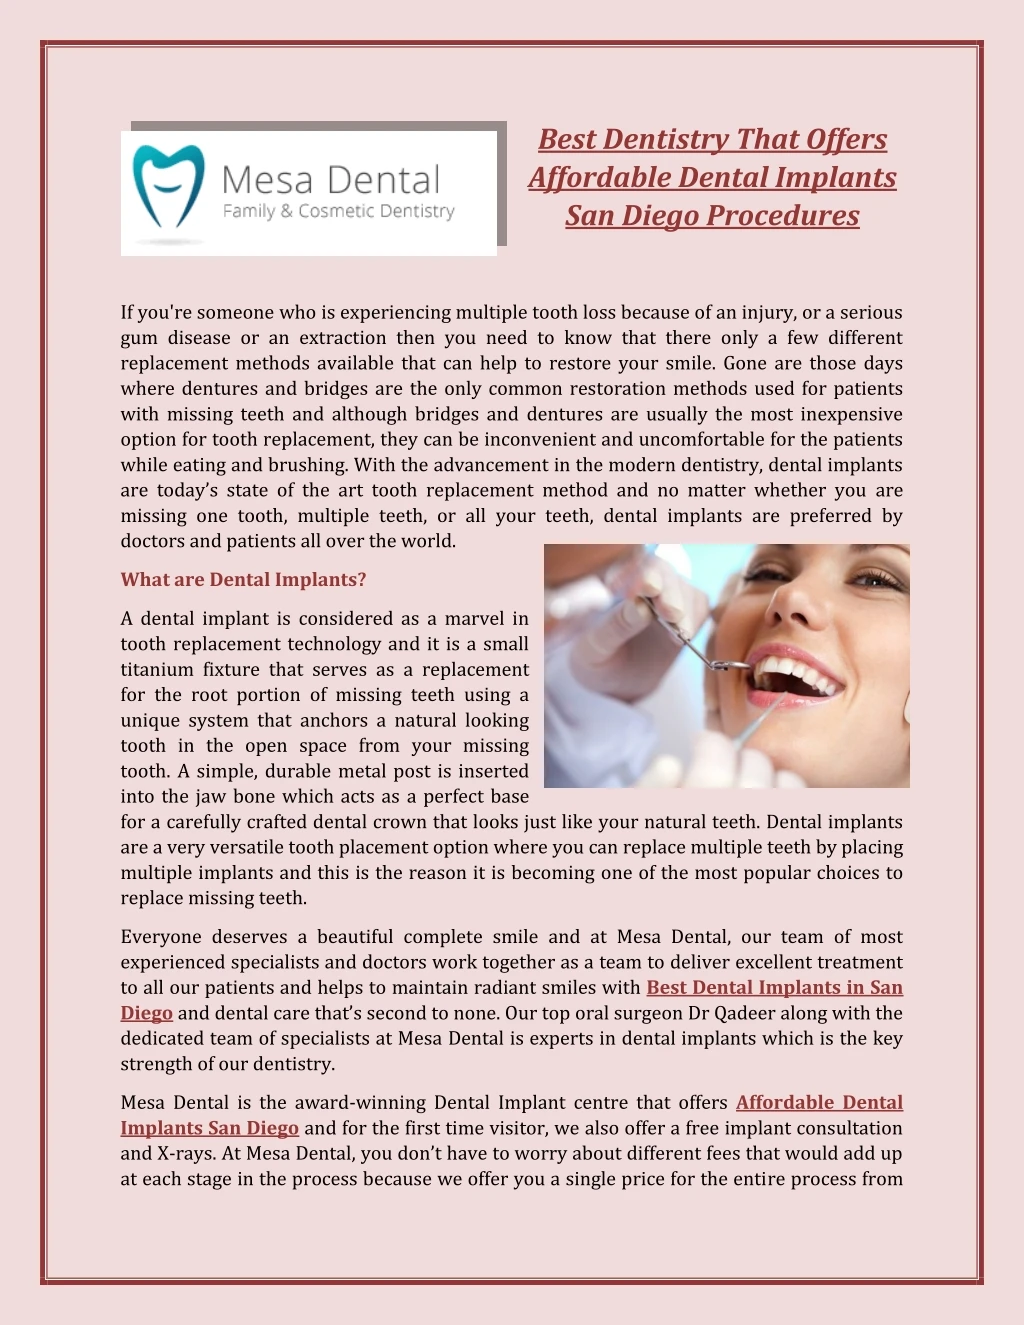 best dentistry that offers affordable dental